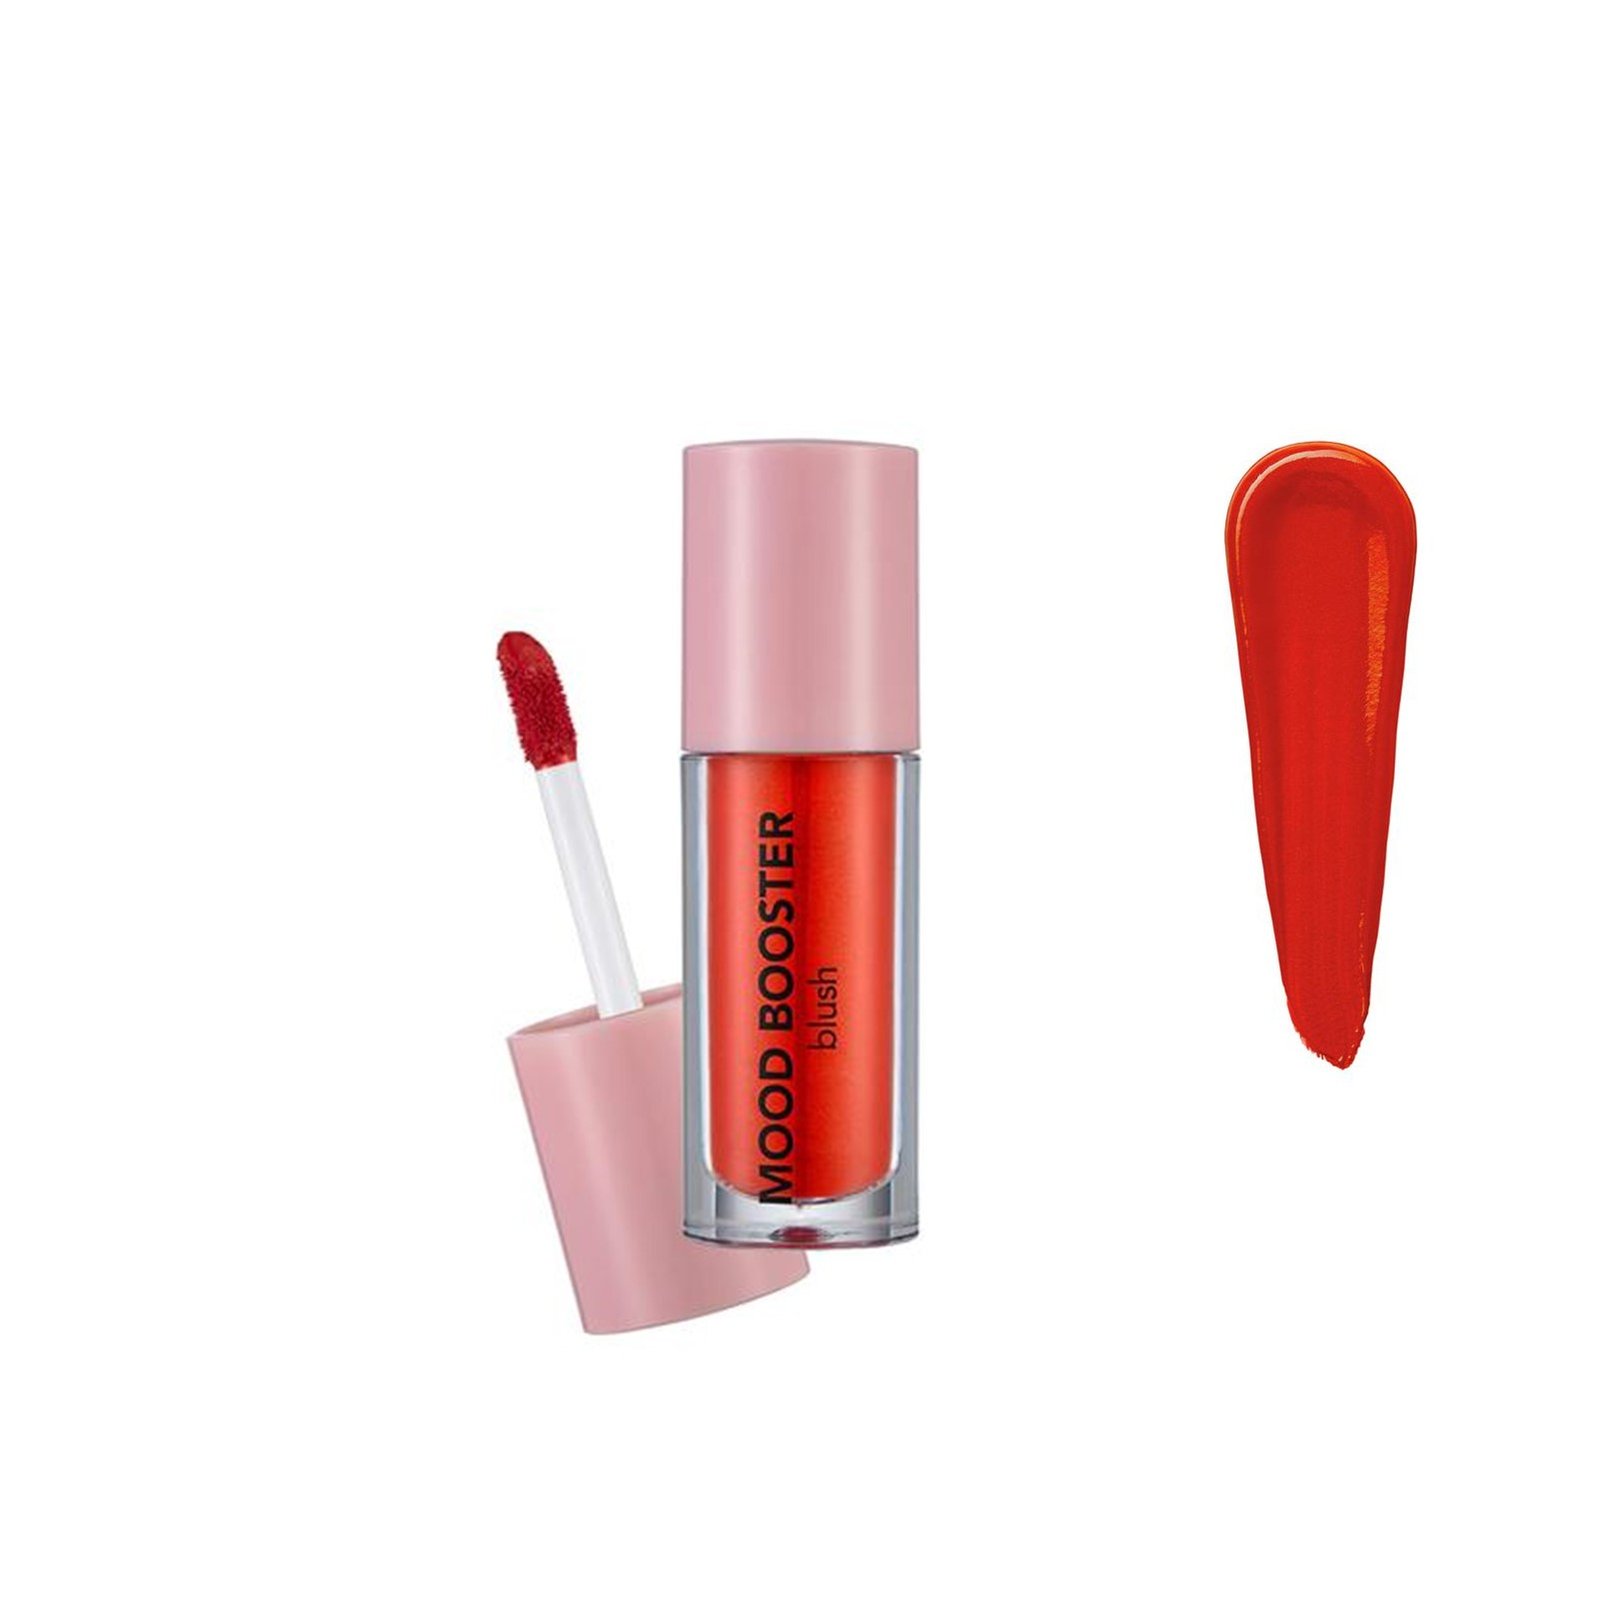 Flormar Mood Booster Blush 04 Feel The Red 4ml